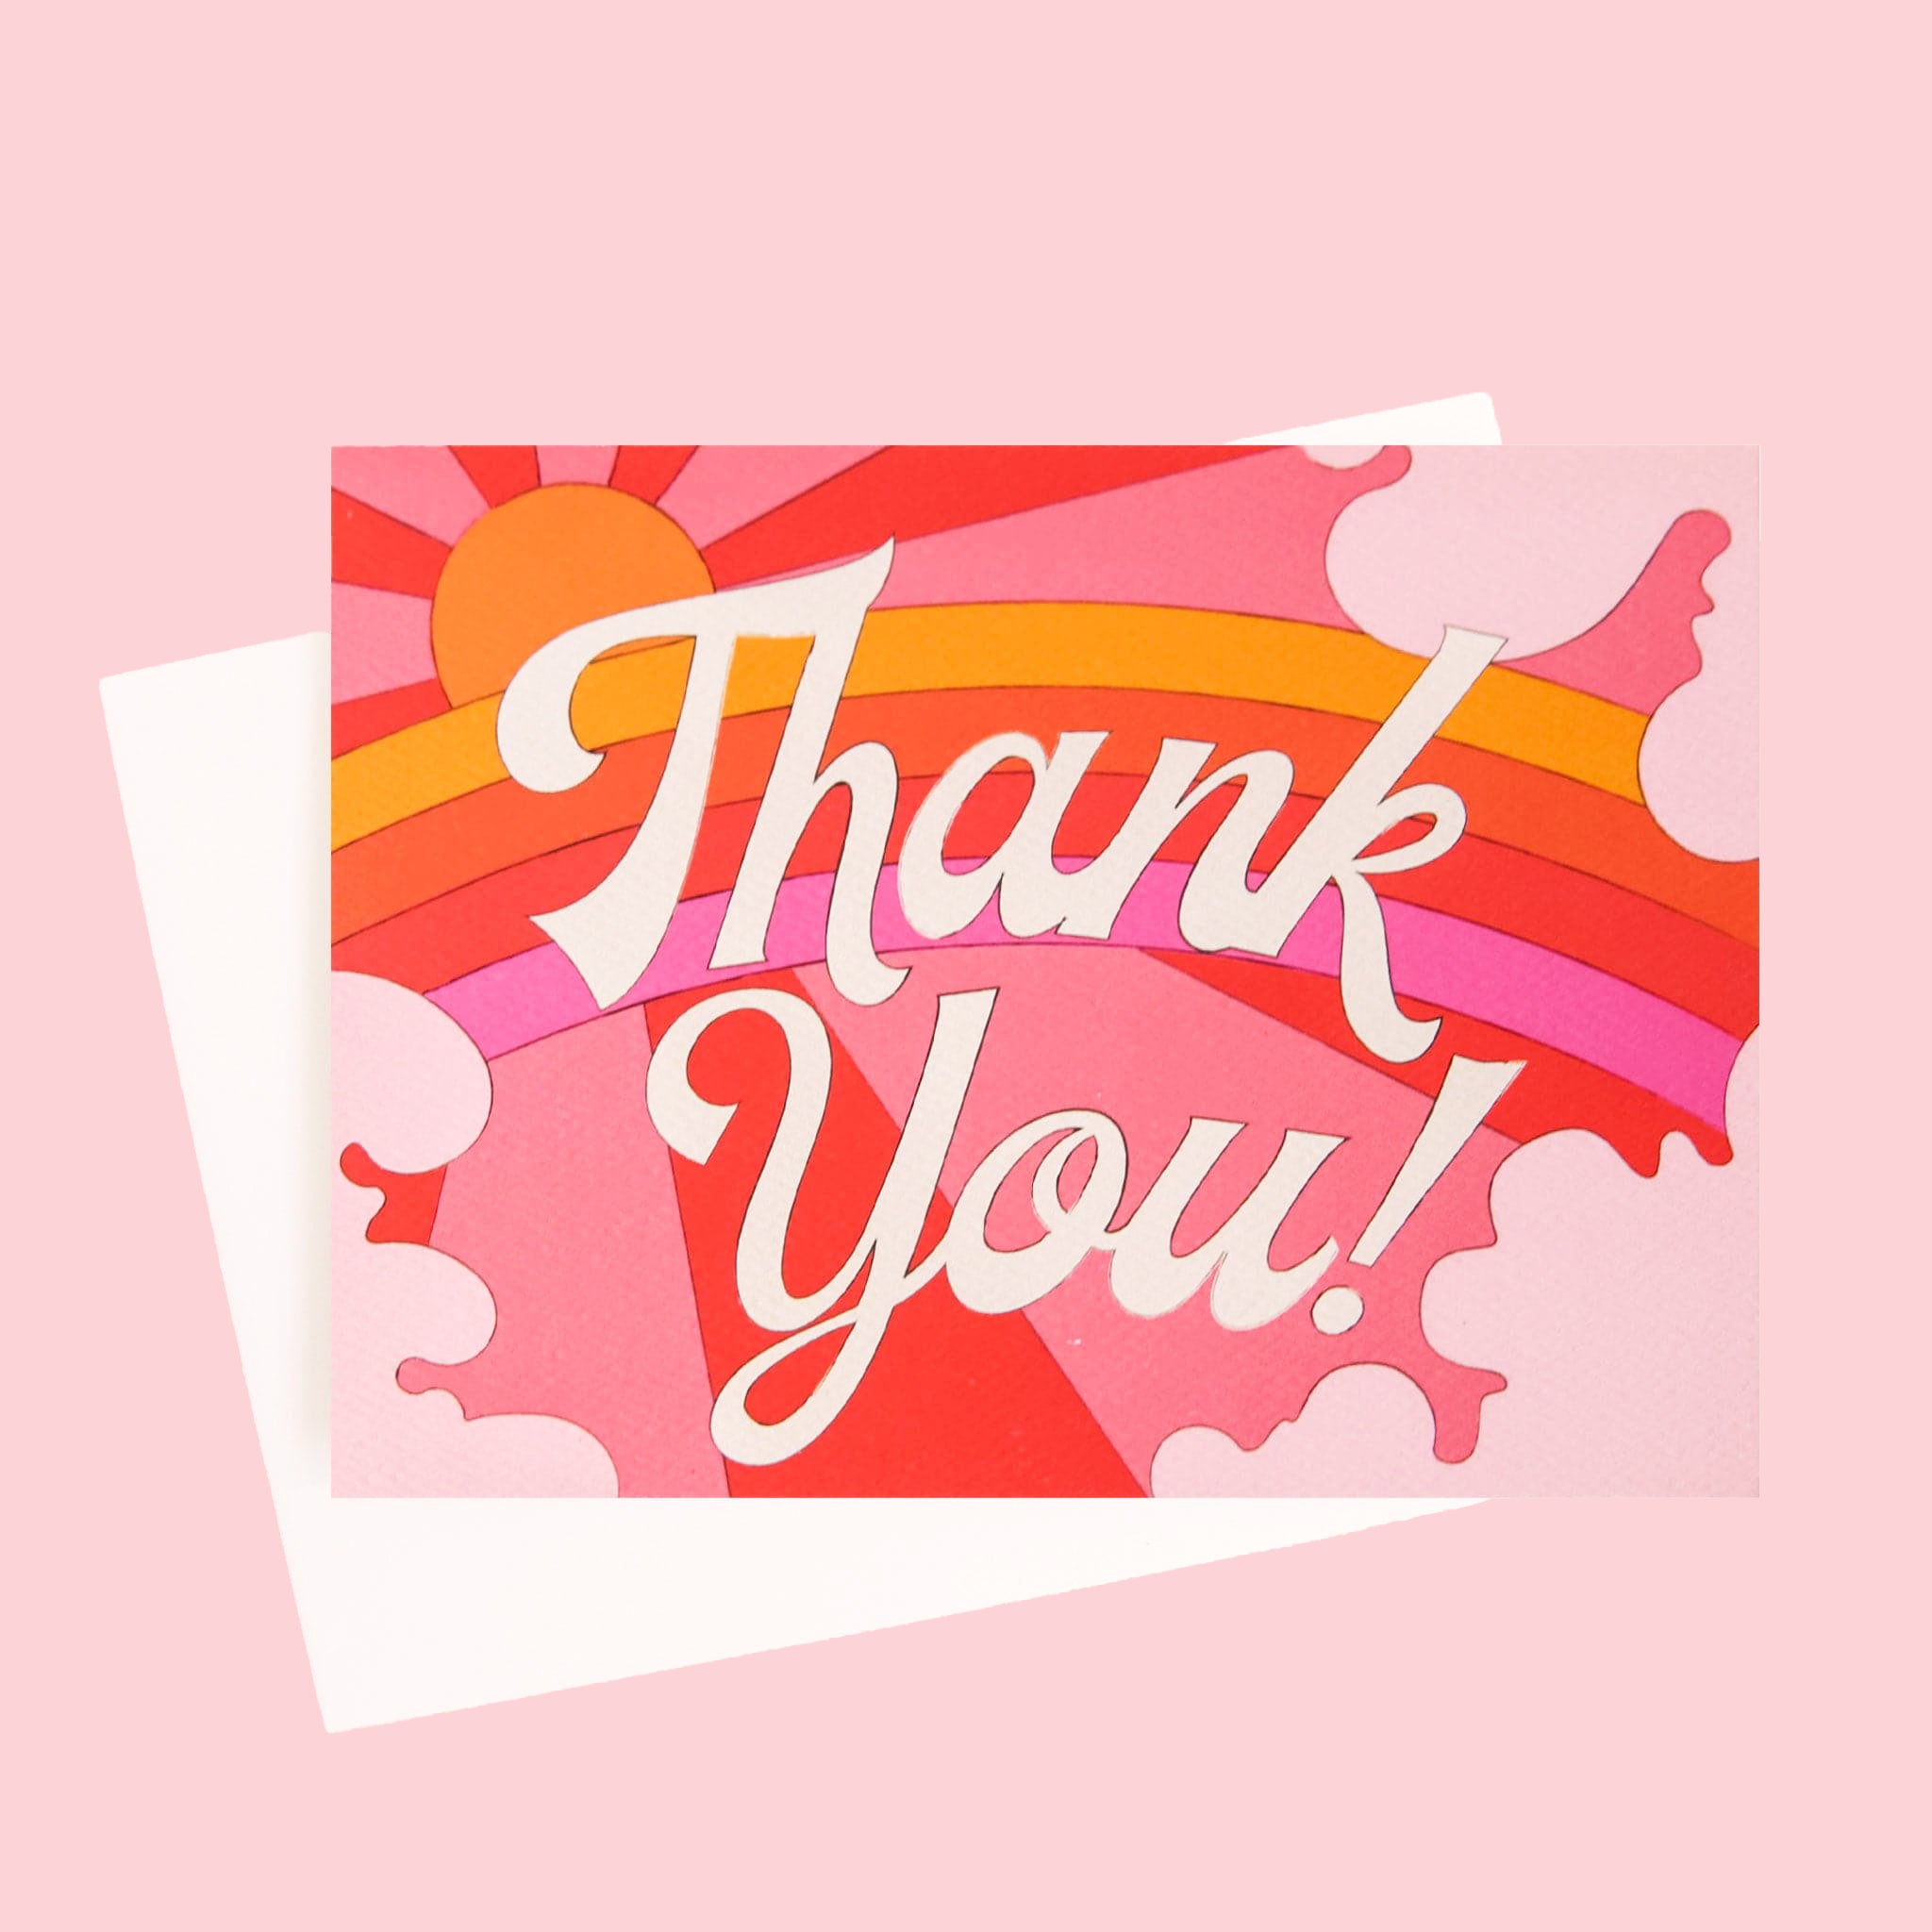 Card with a vibrant scene of a rosie toned rainbow and beaming pink and red sun. Soft pink cloud take up the edges. The center of the card reads 'Thank you!' in white cursive lettering.